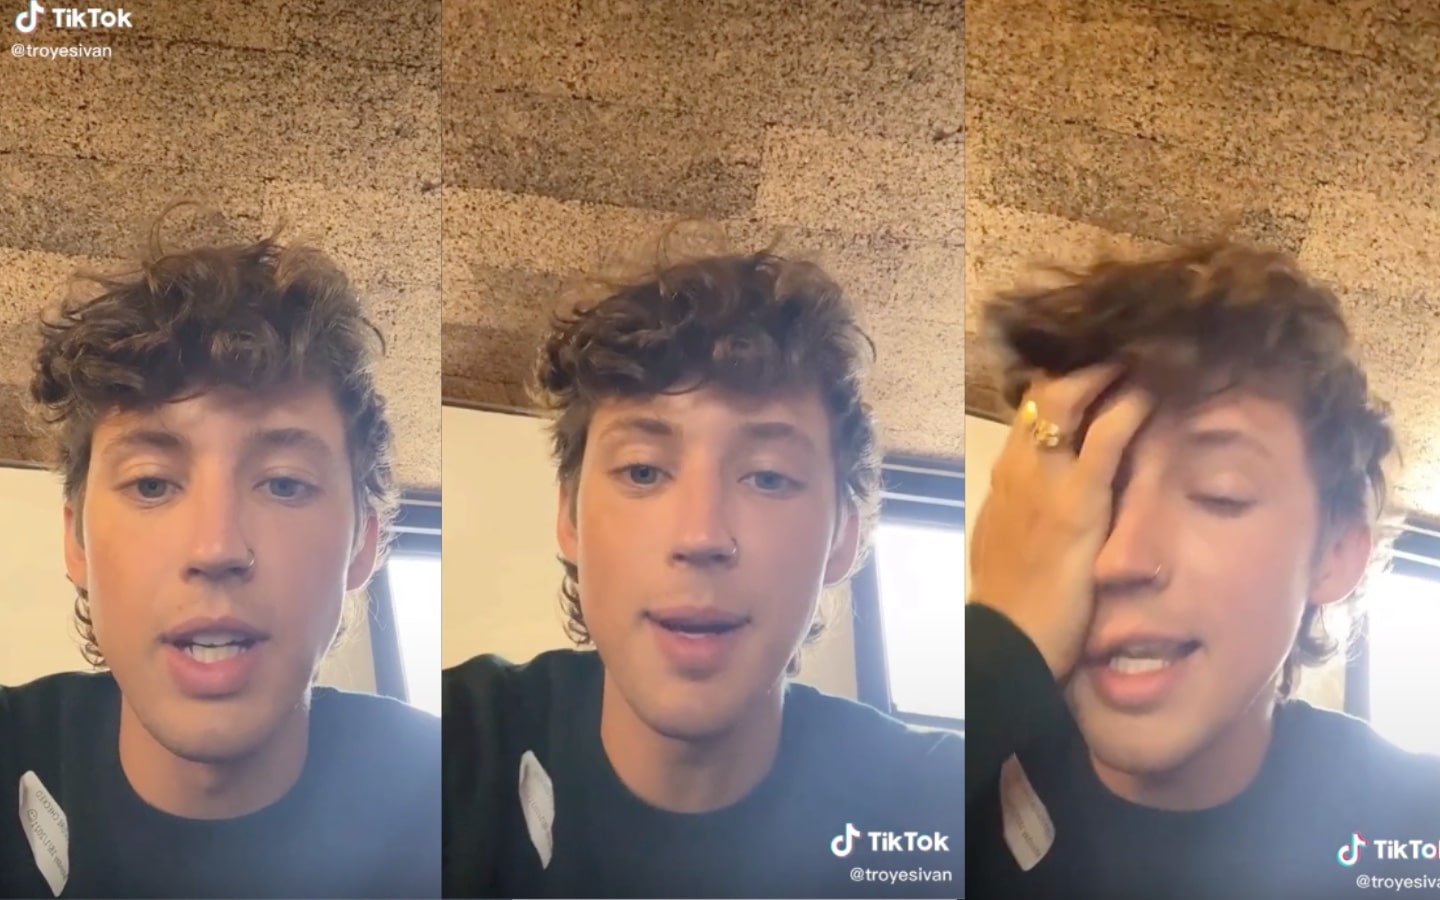 Troye Sivan regales fans with awkward yet hilarious condom story